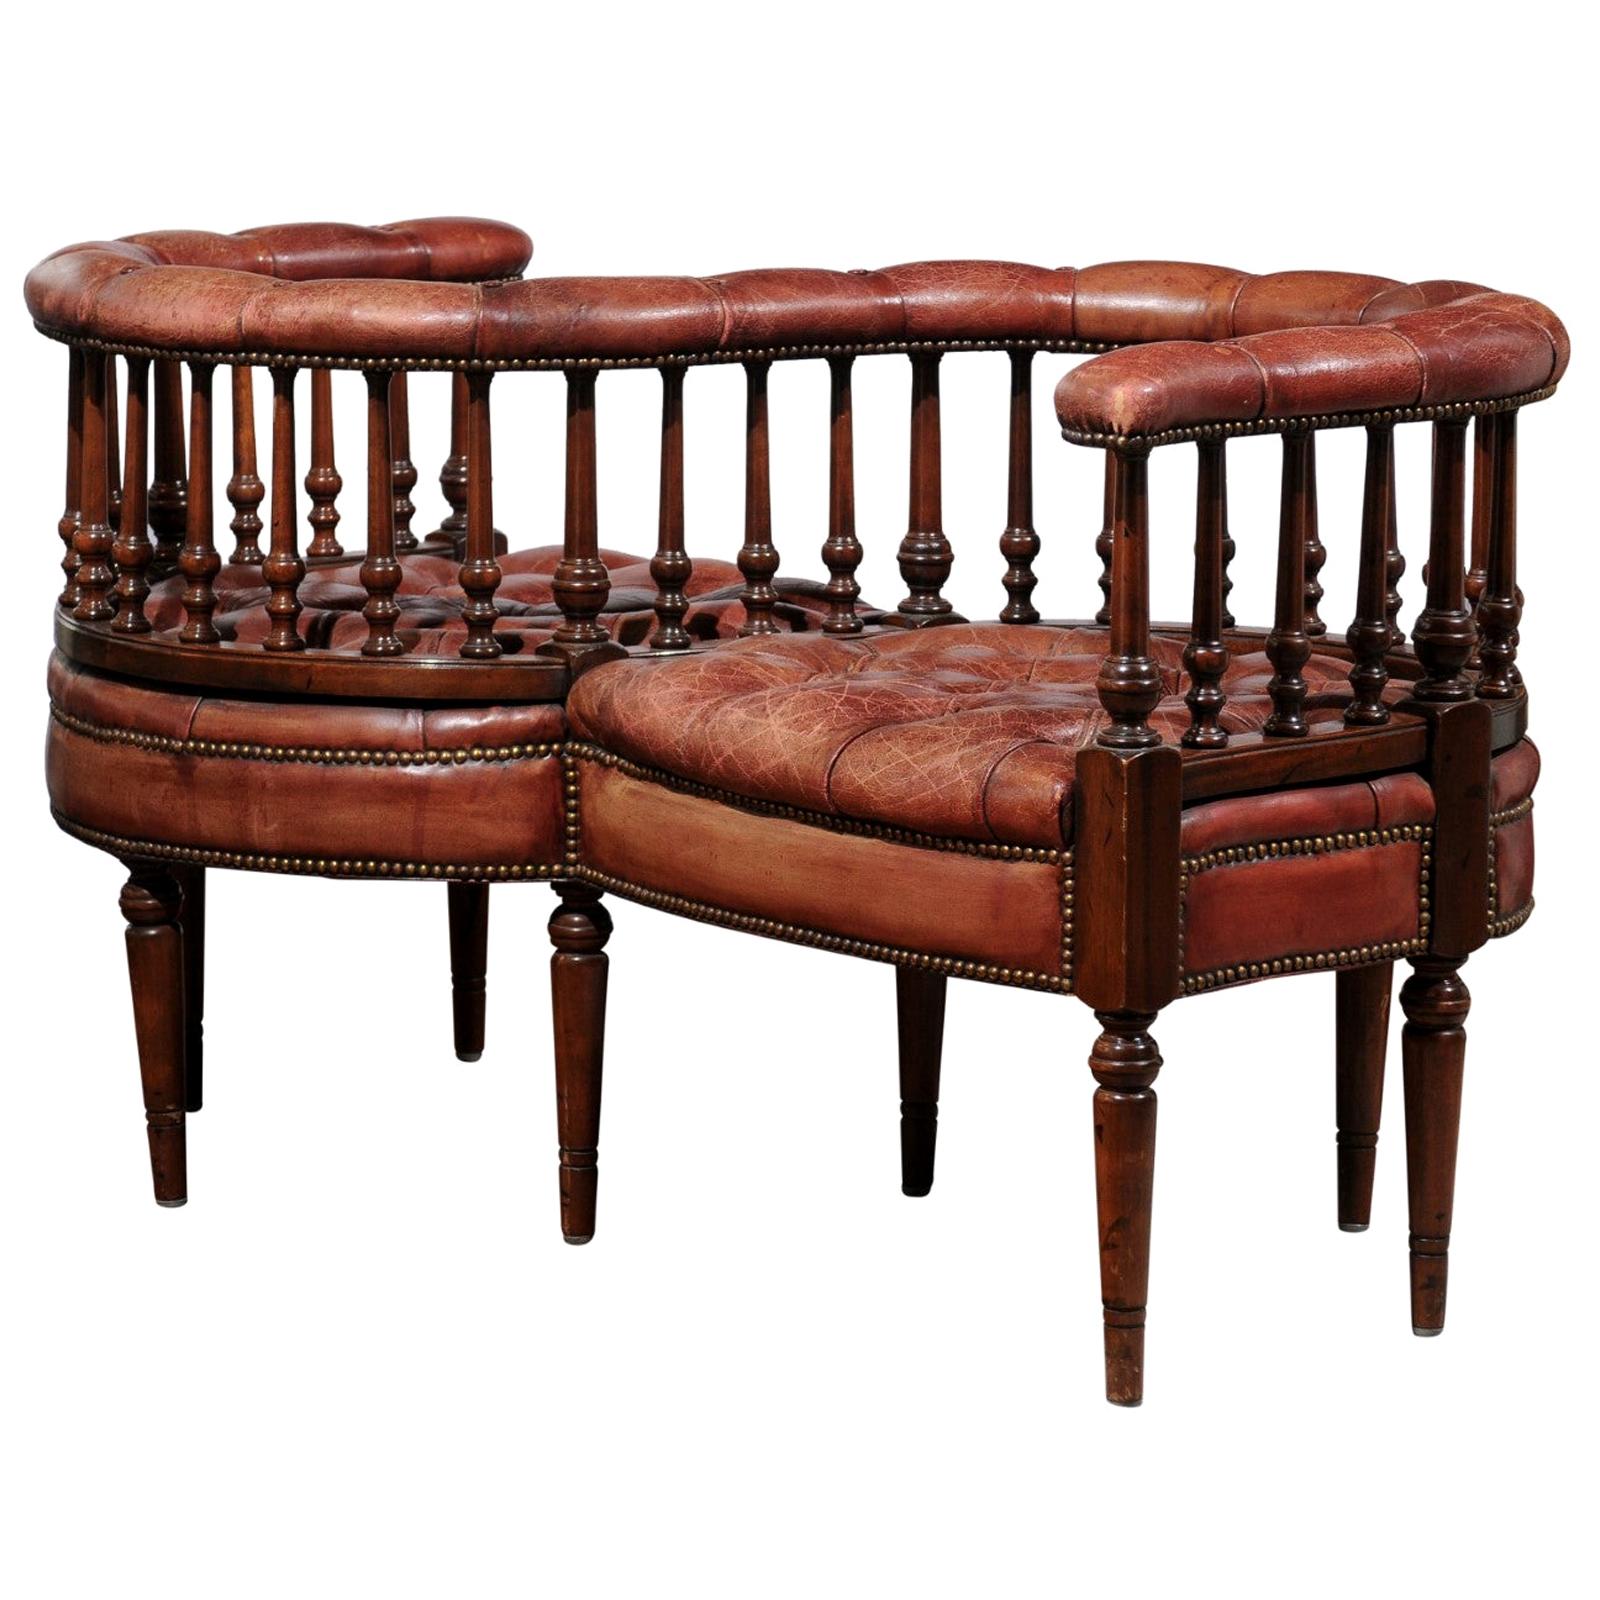 French 19th Century Tufted Leather Tête-à-Tête Conversation Bench with Nailhead